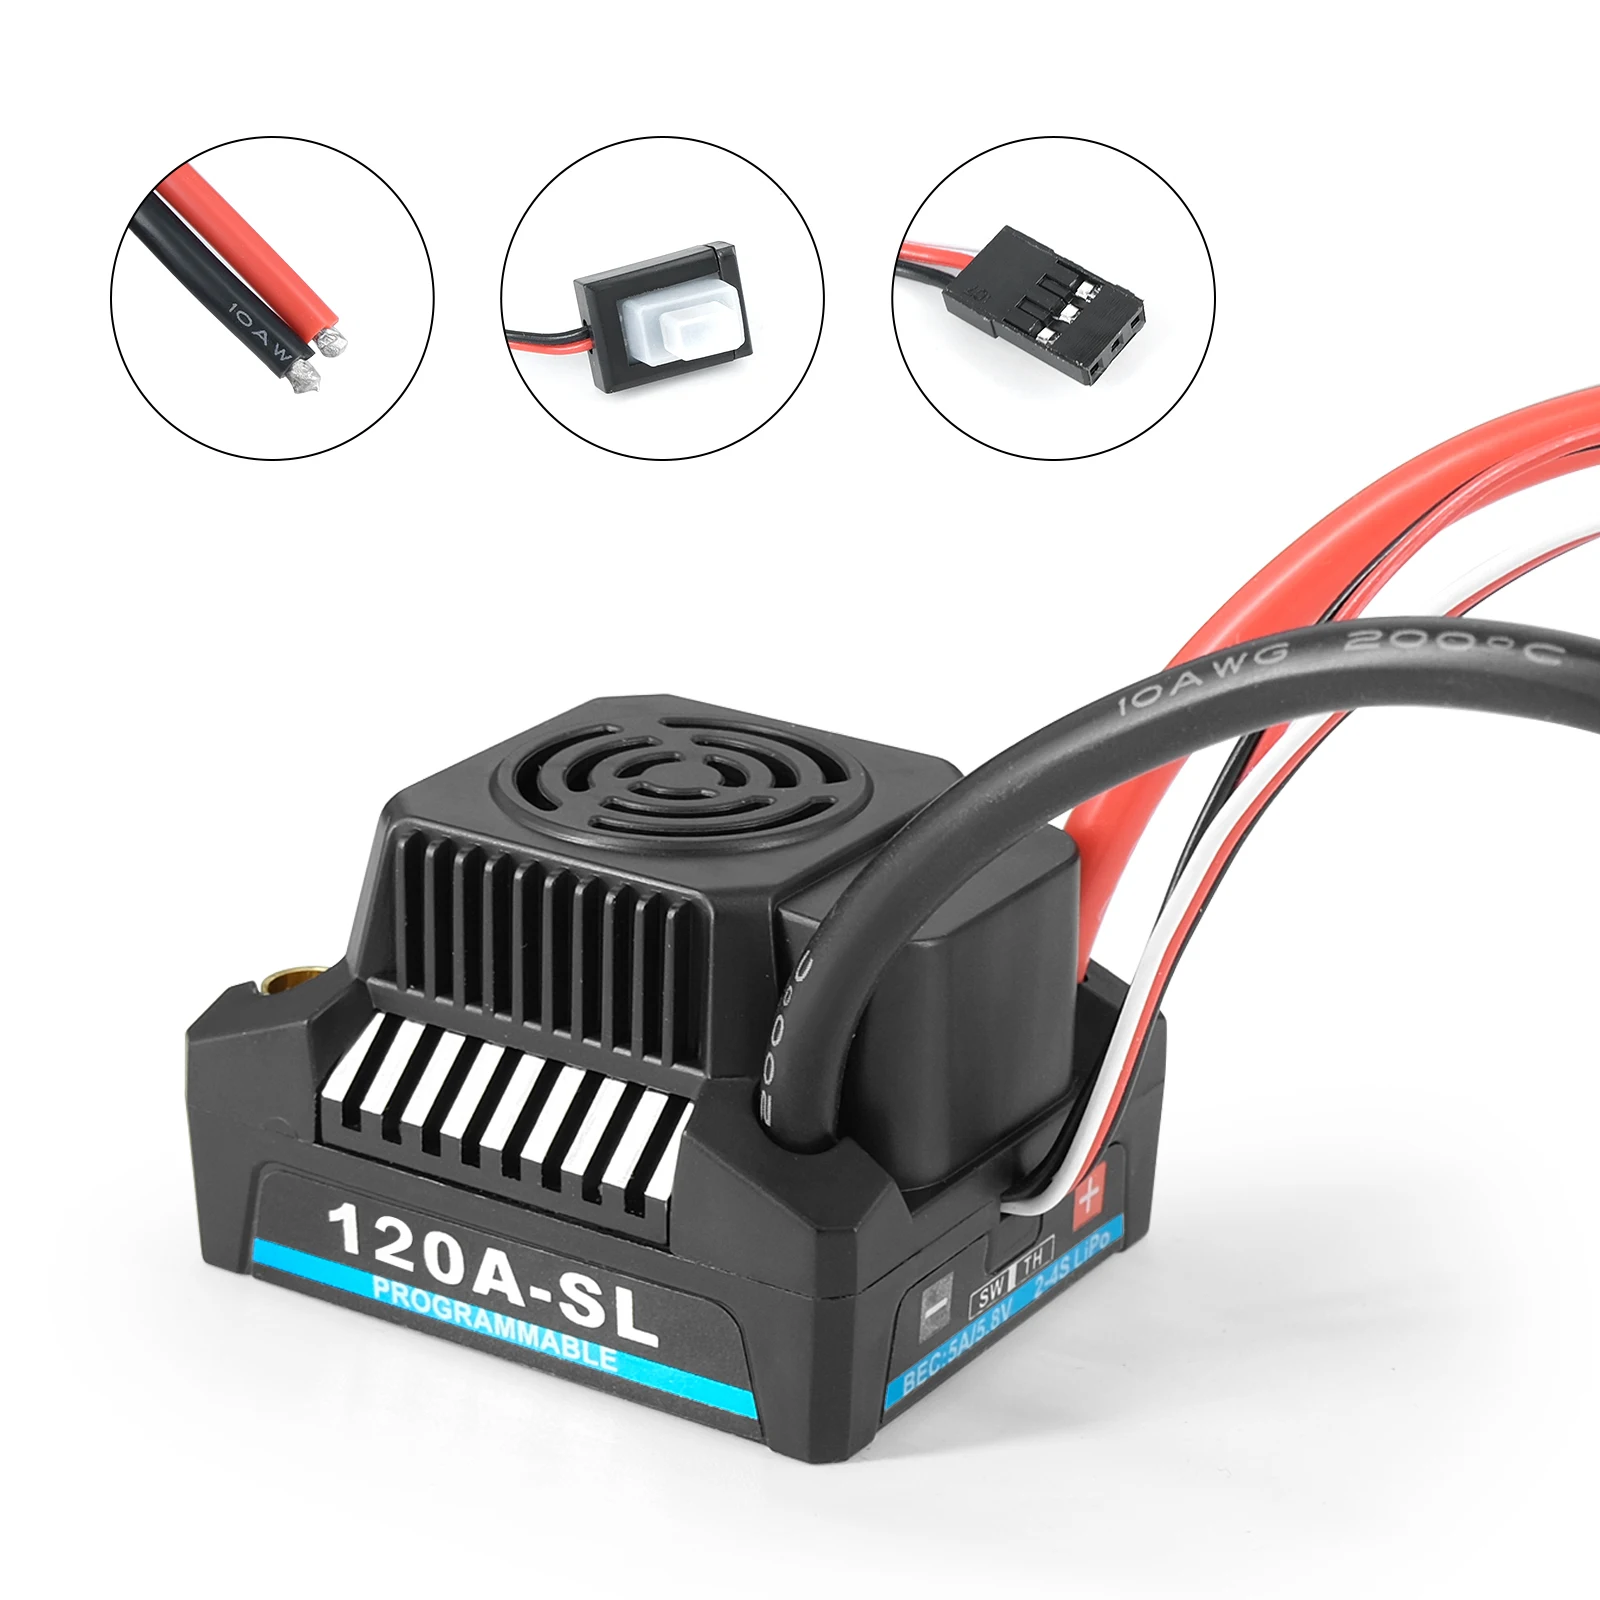 

120A 150A 2-4S Waterproof Brushless ESC With 5.8V-6.1V3A BEC For 18 110 112 RC Model Car Truck Buggy Boat